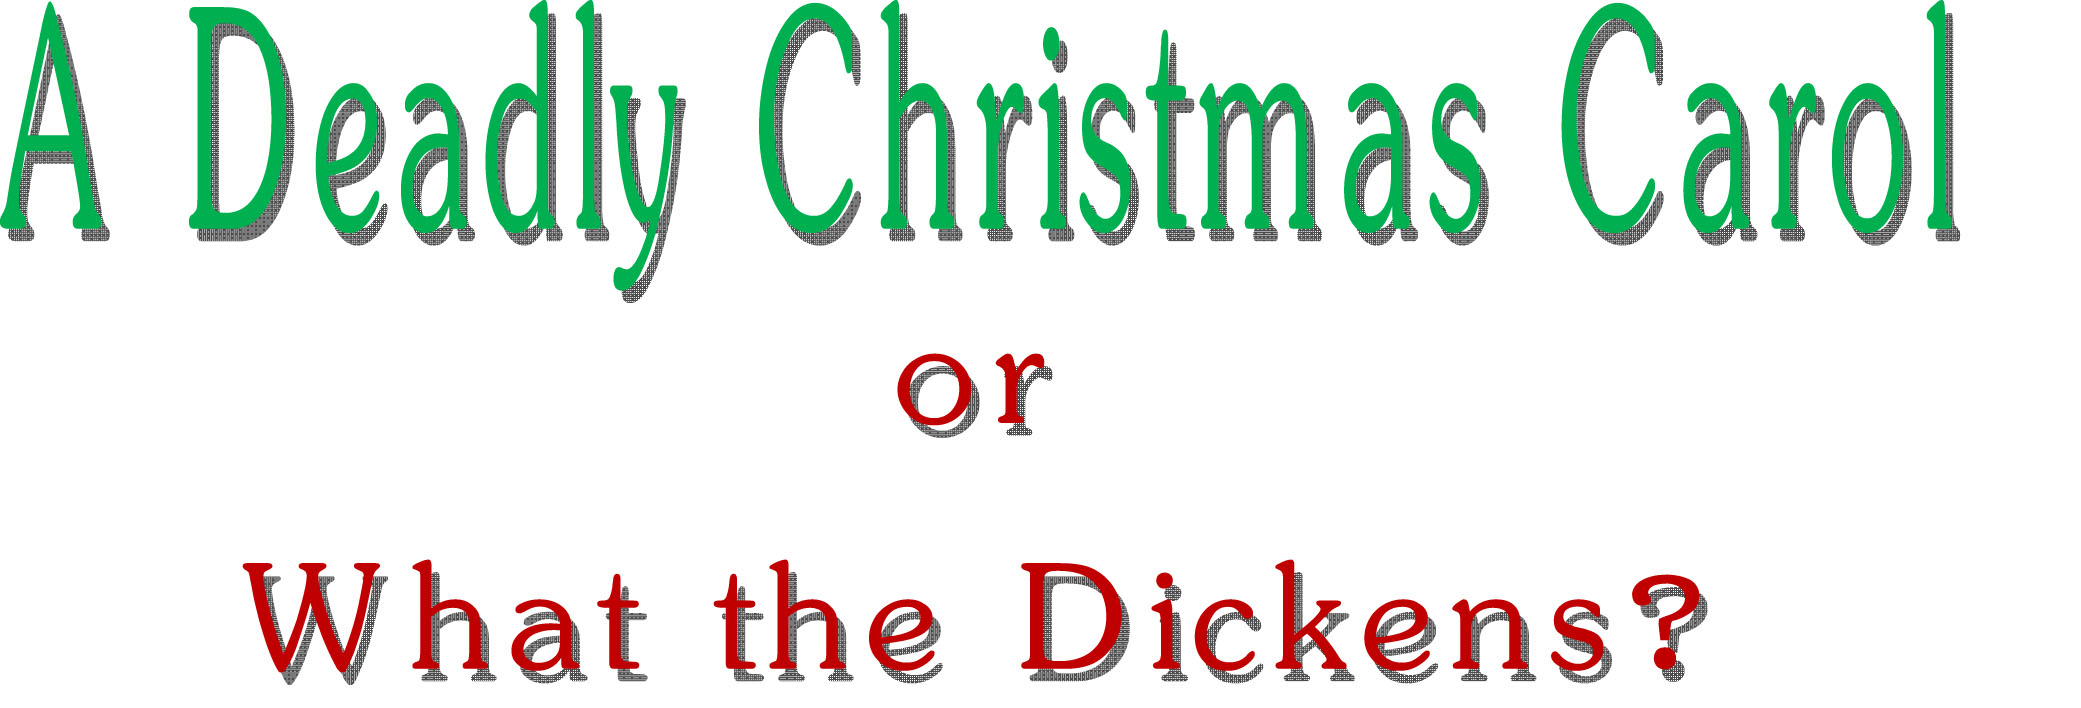 A Deadly Christmas Carol or What the Dickens?